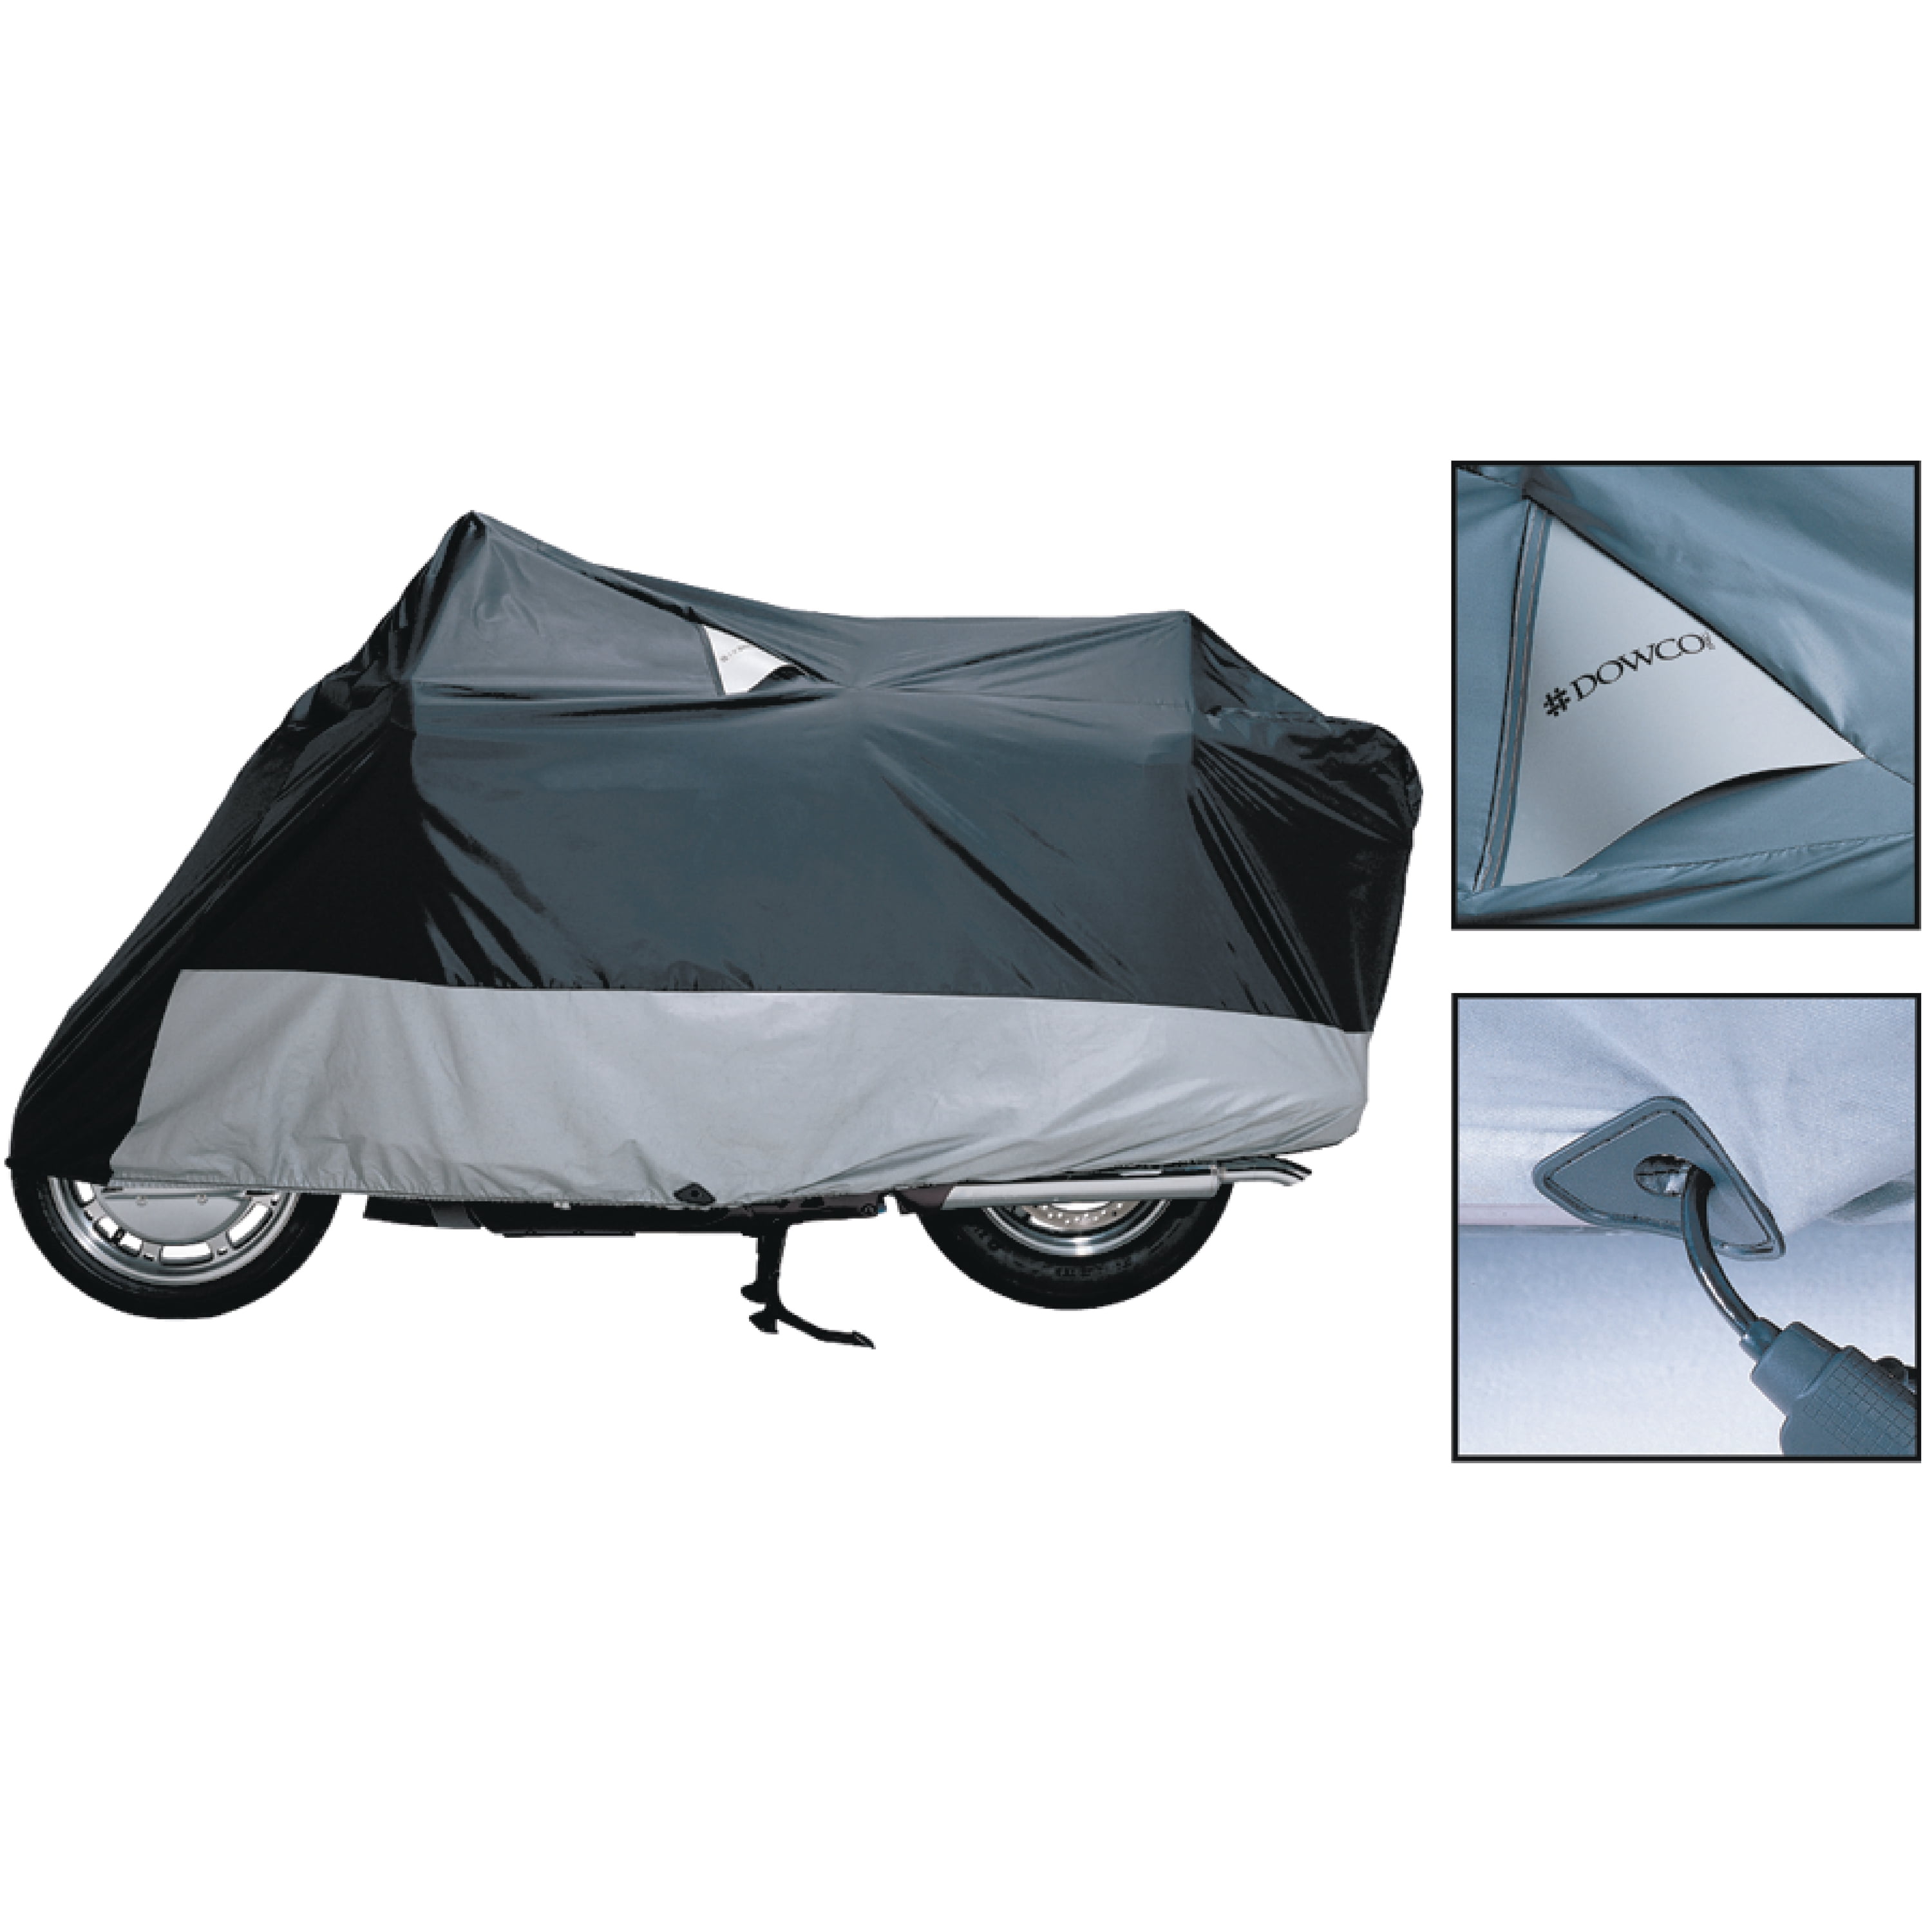 Dowco Guardian Weatherall Plus Motorcycle Cover Size Chart